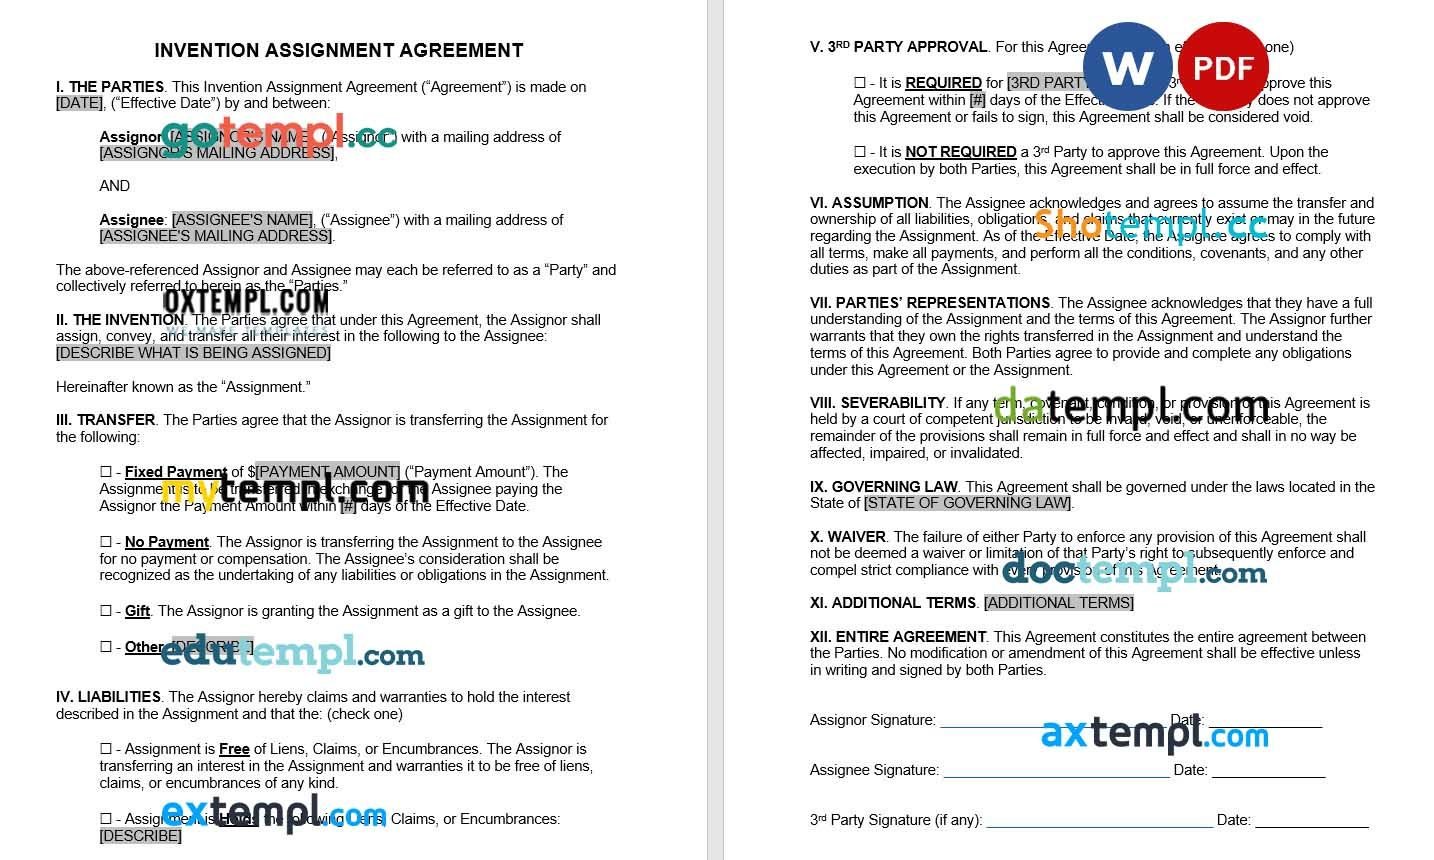 Invention Assignment Agreement word example, fully editable